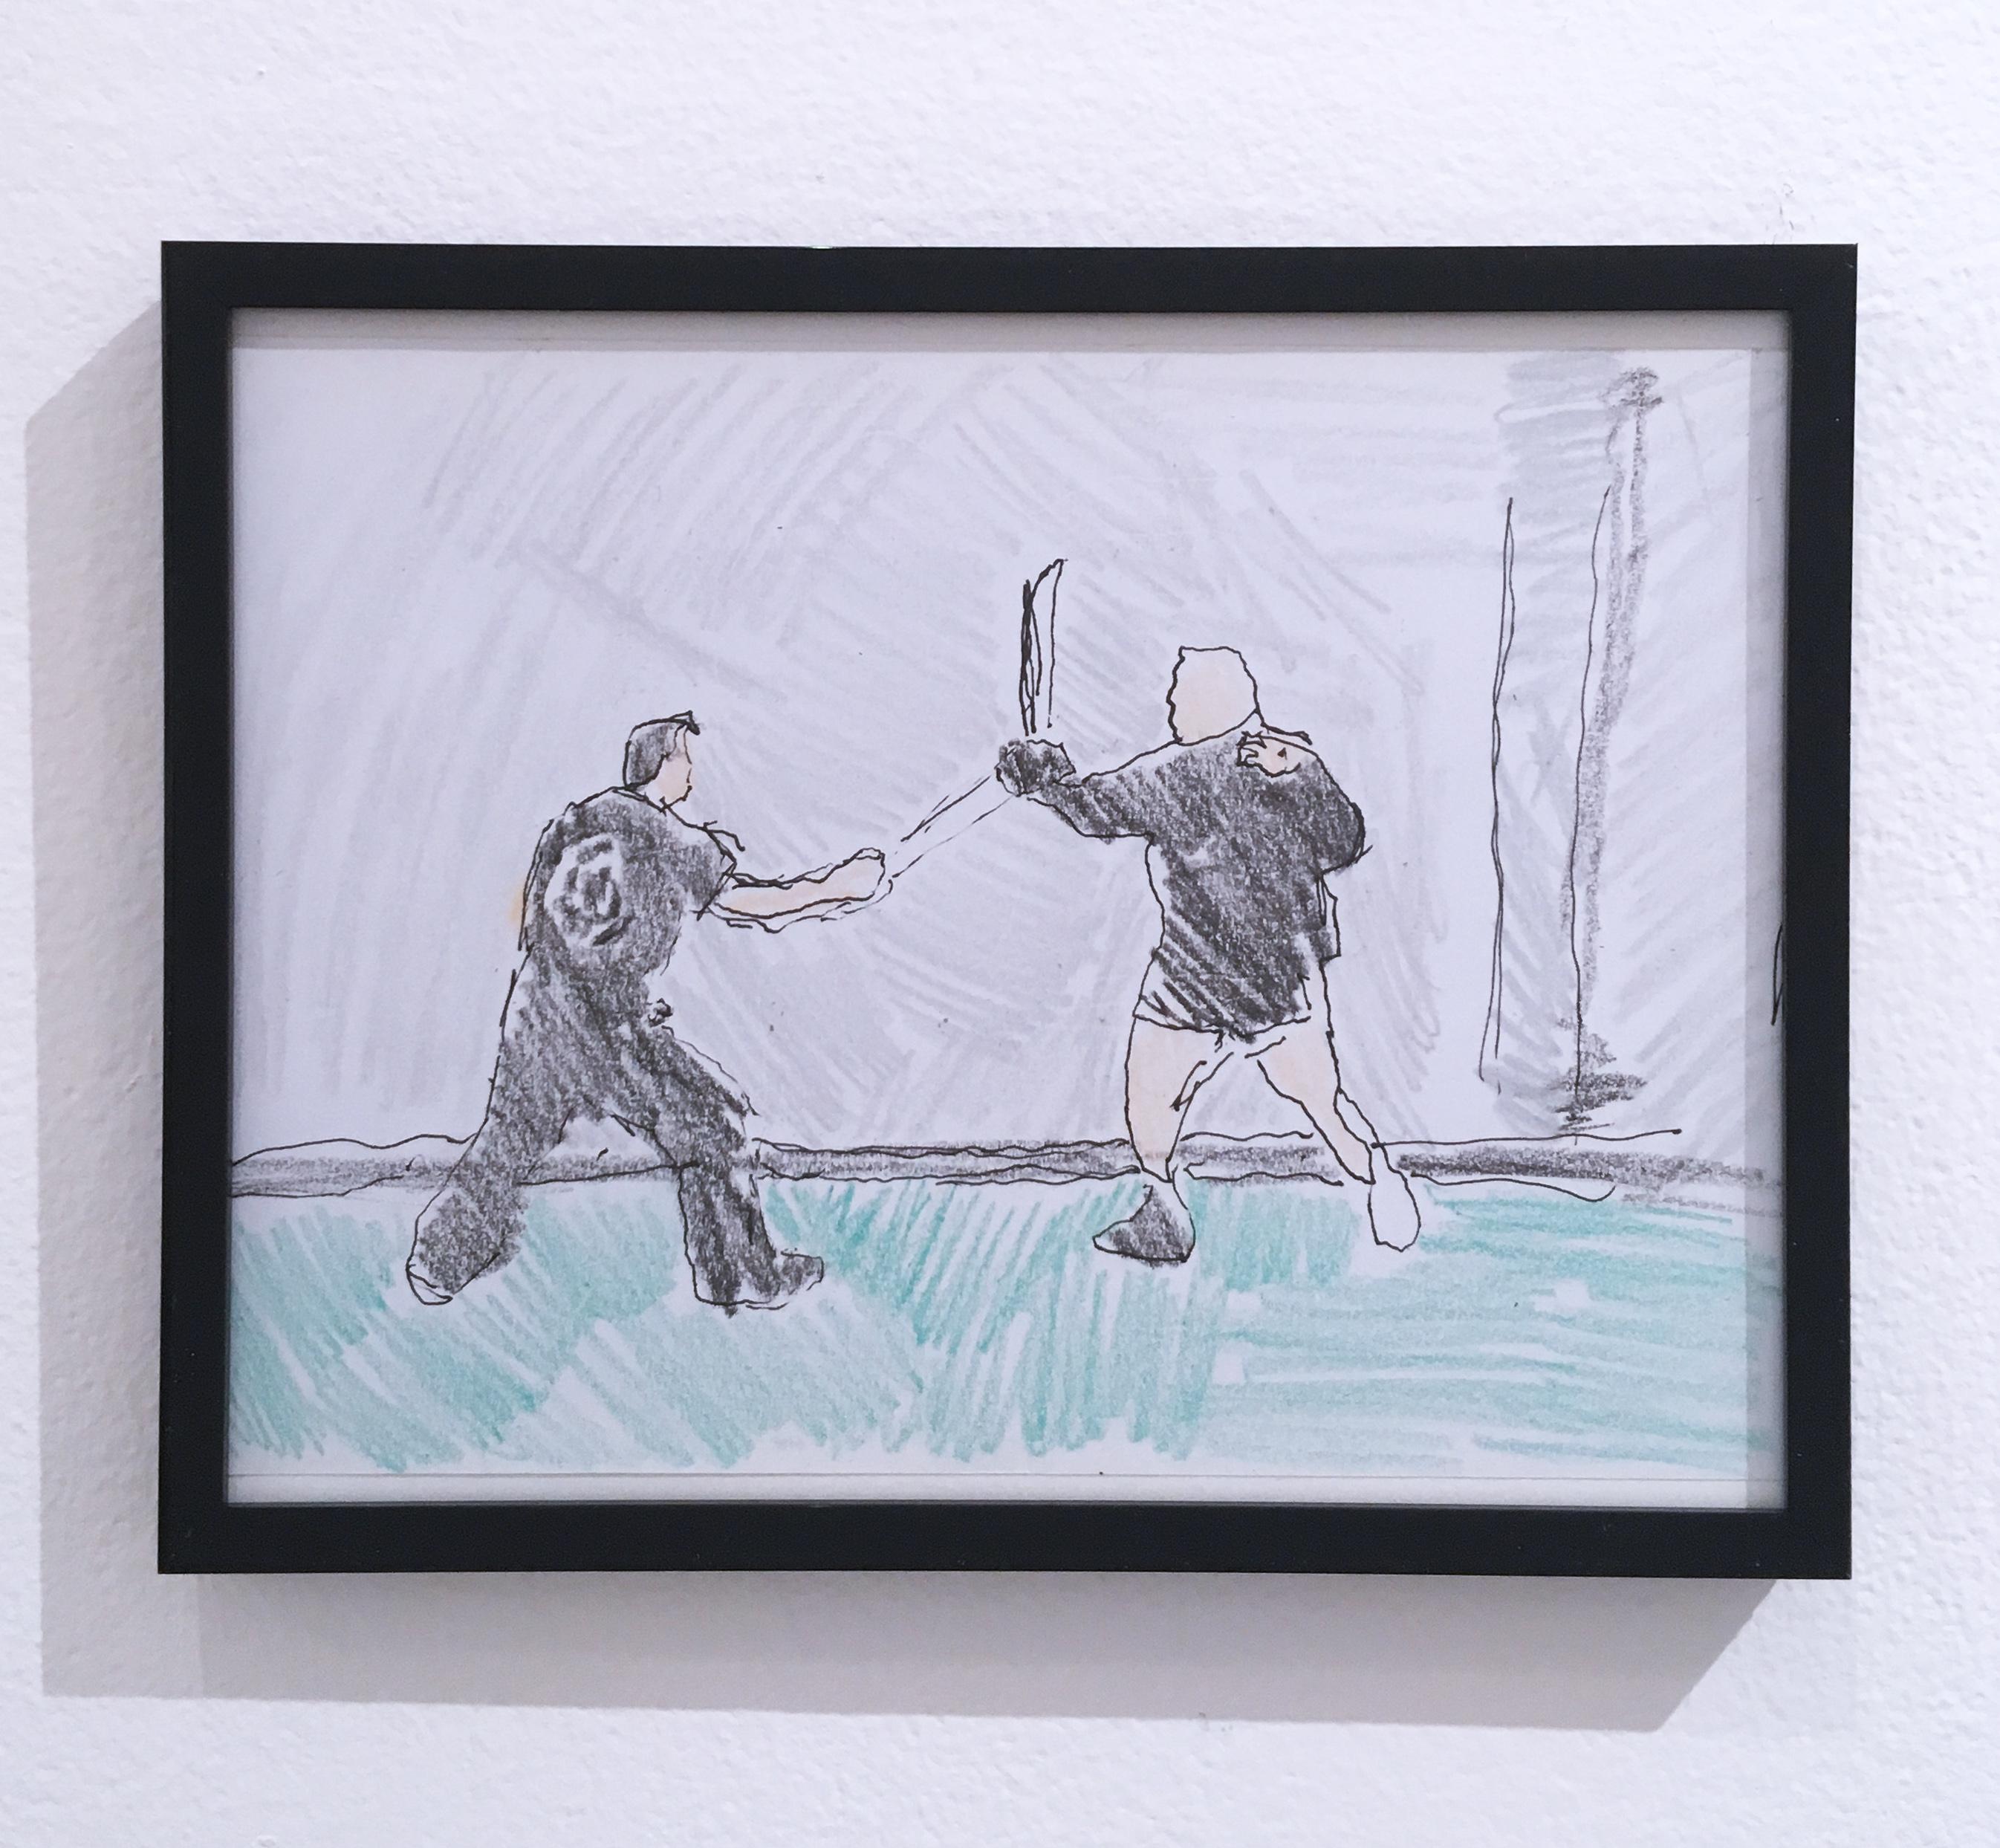 Macauley Norman Figurative Painting - Sword Fight, 2018, pen and crayon on paper, figurative, drawing, framed